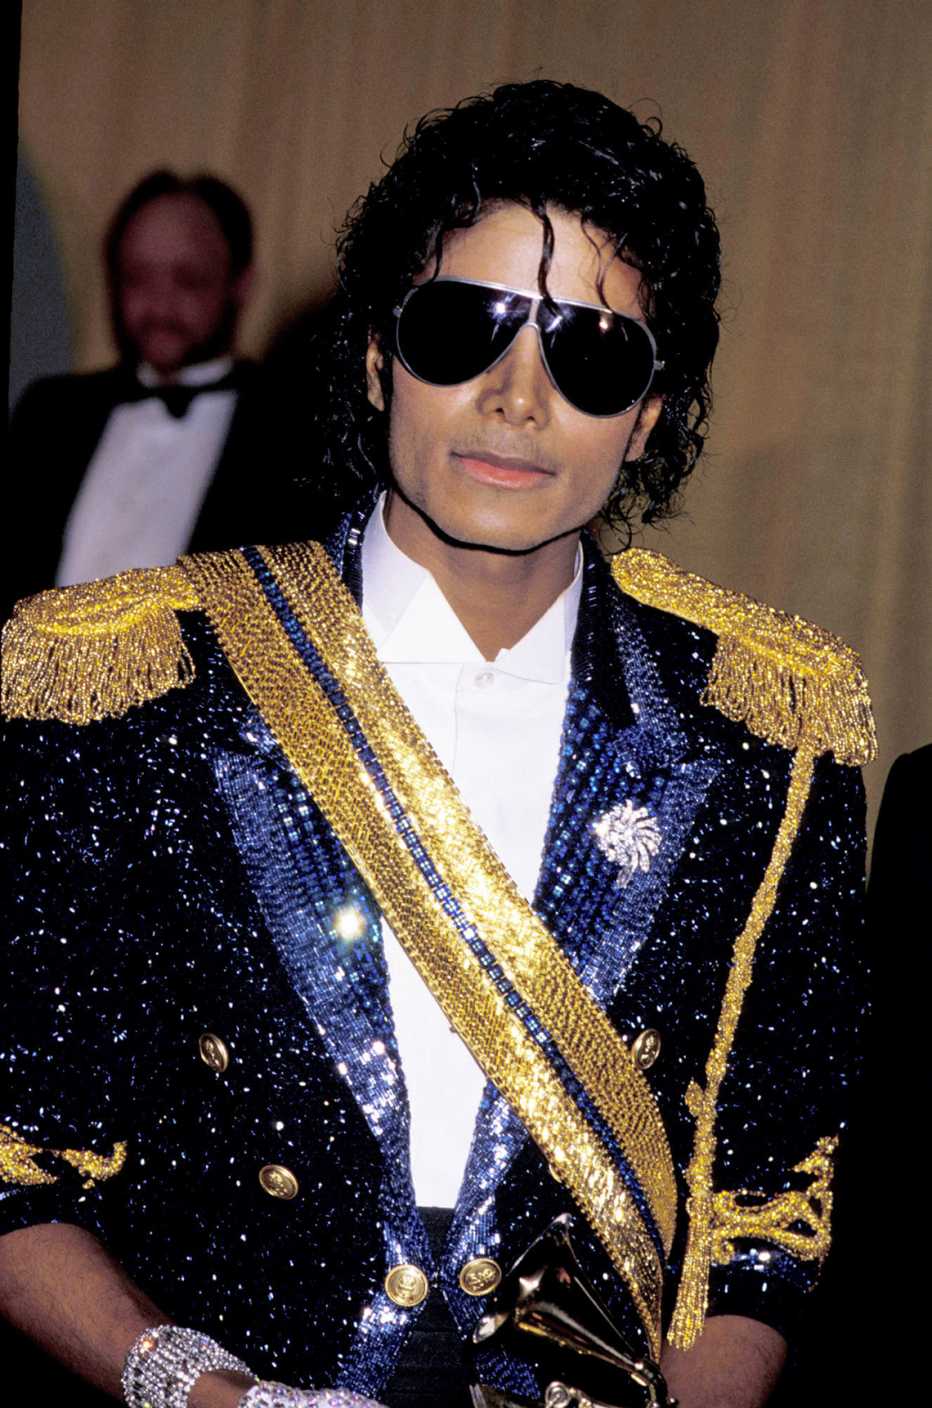 Michael Jackson wearing sunglasses at the 26th Annual Grammy Awards